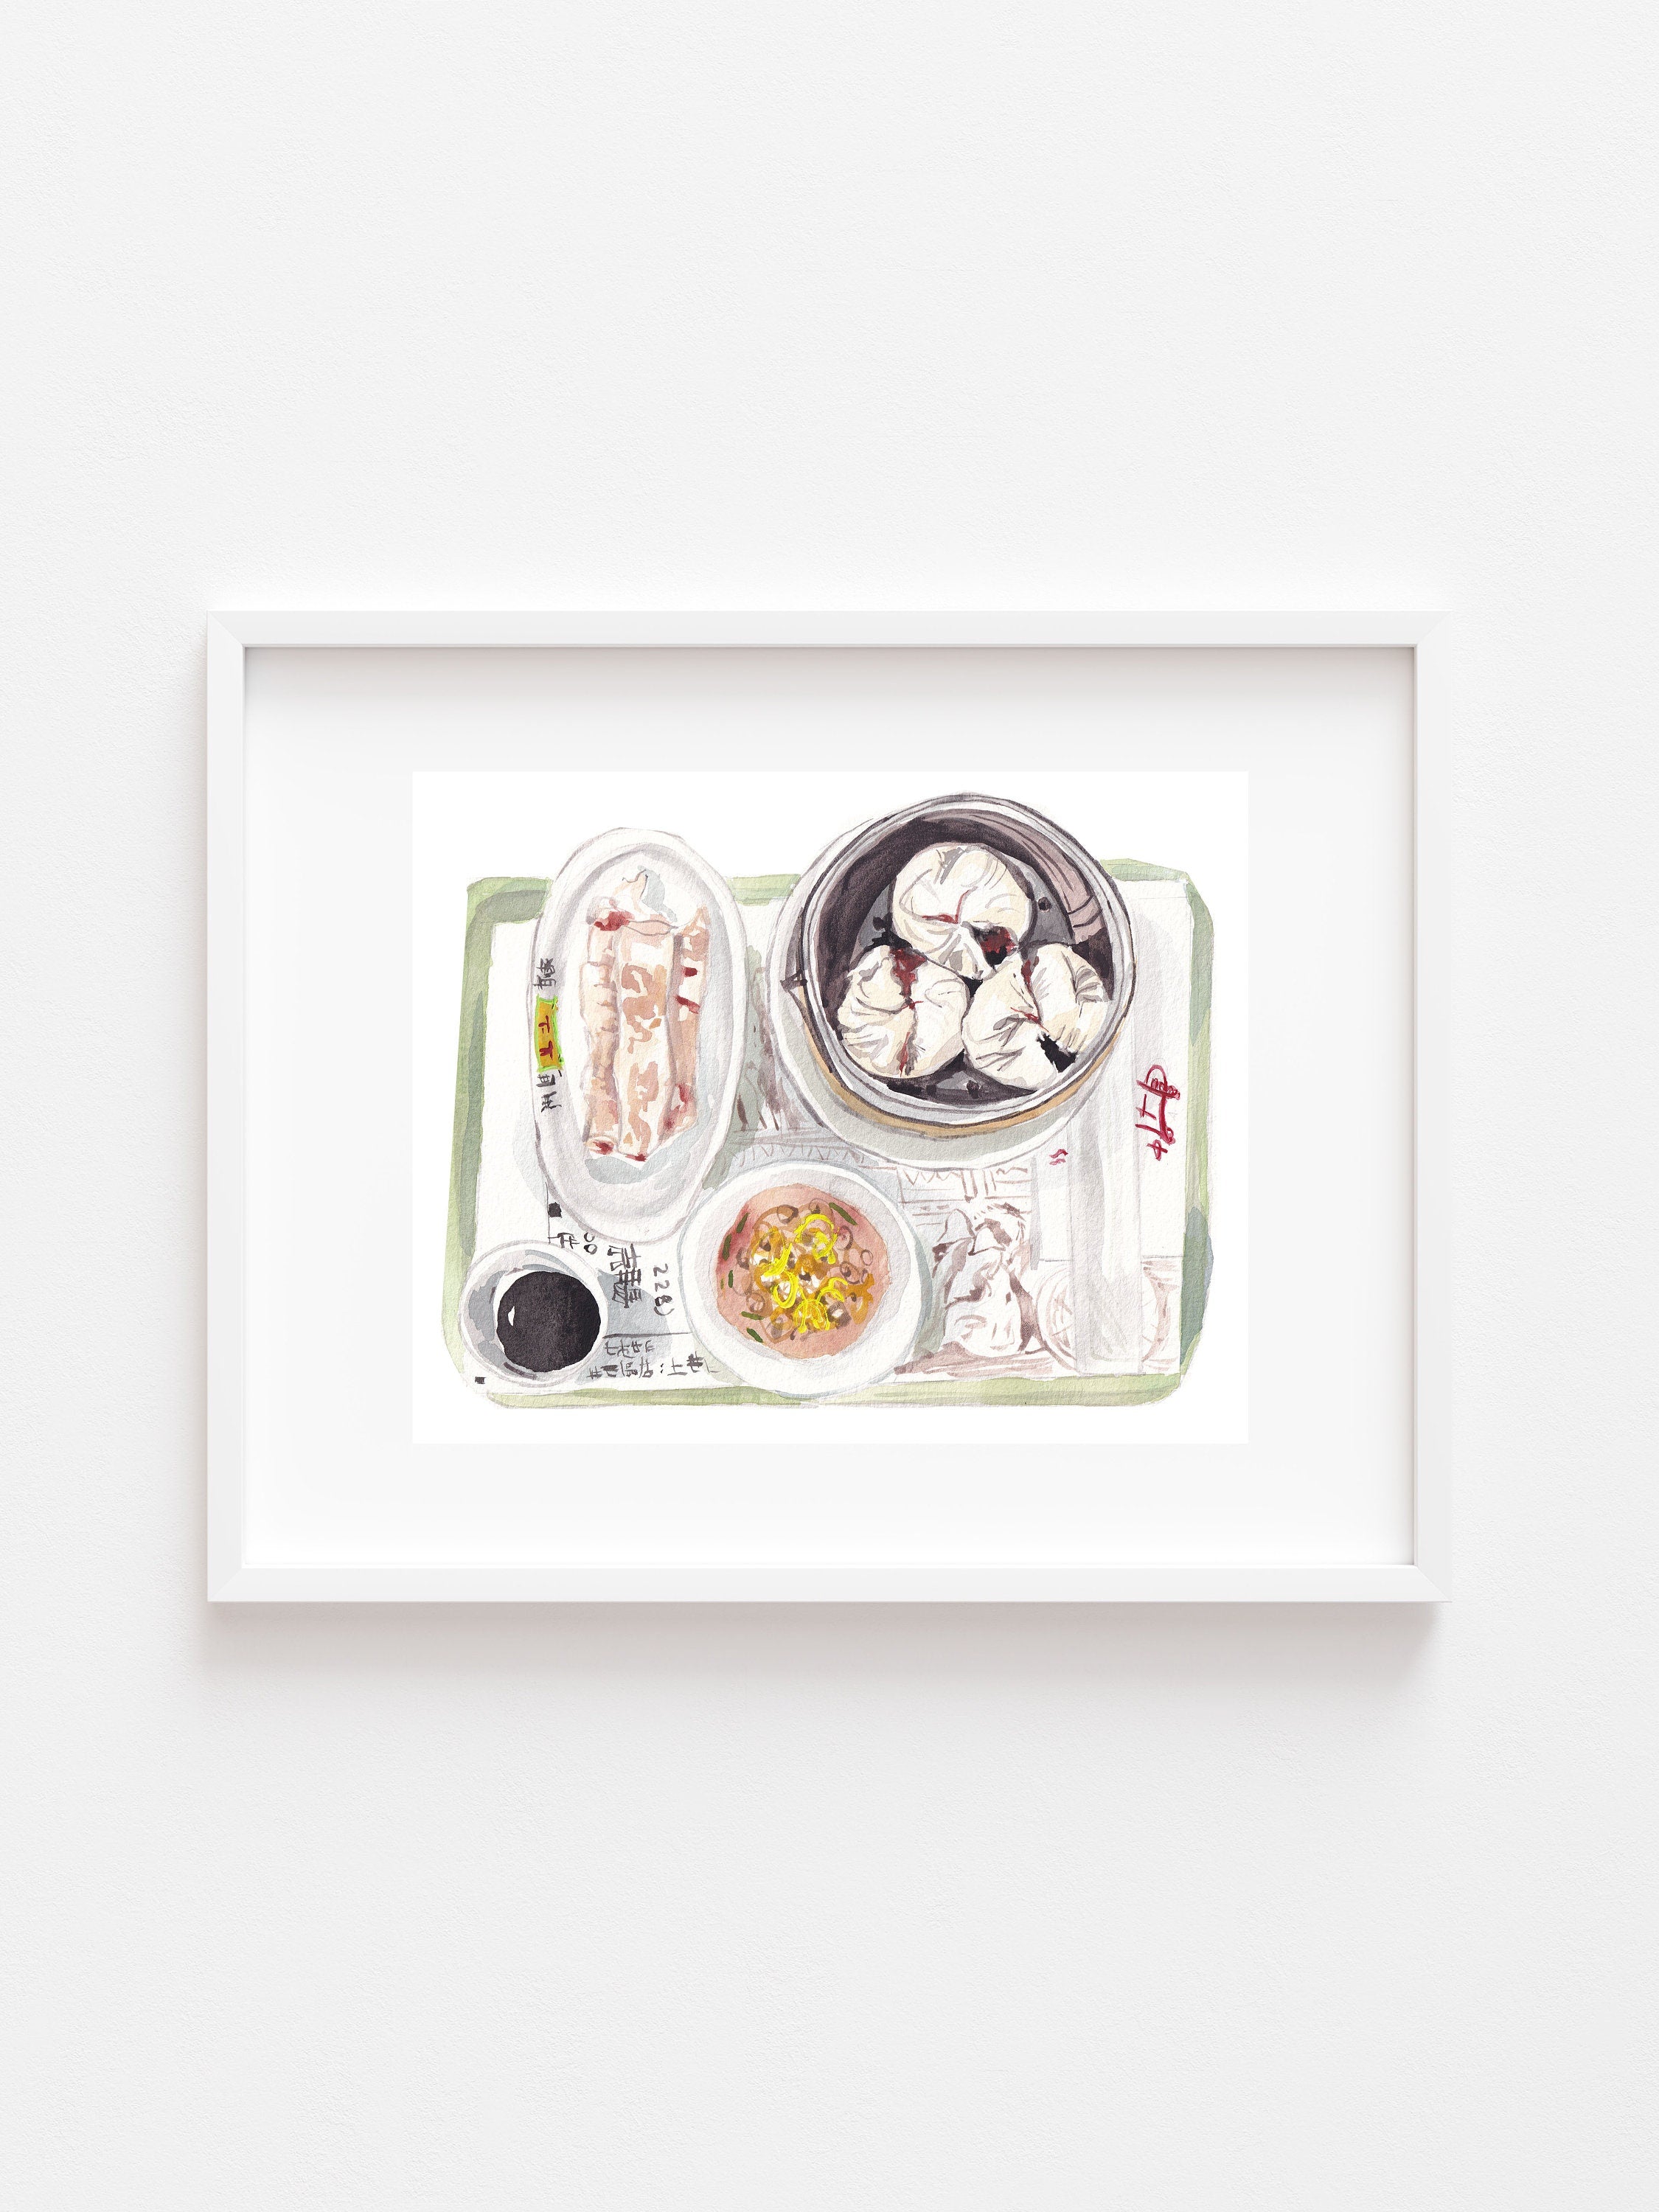 Dim sum print of painting by Medjool Studio. Print of a watercolor painting of a dim sum meal at the Hong Kong International Airport including traditional noodles and dumplings.